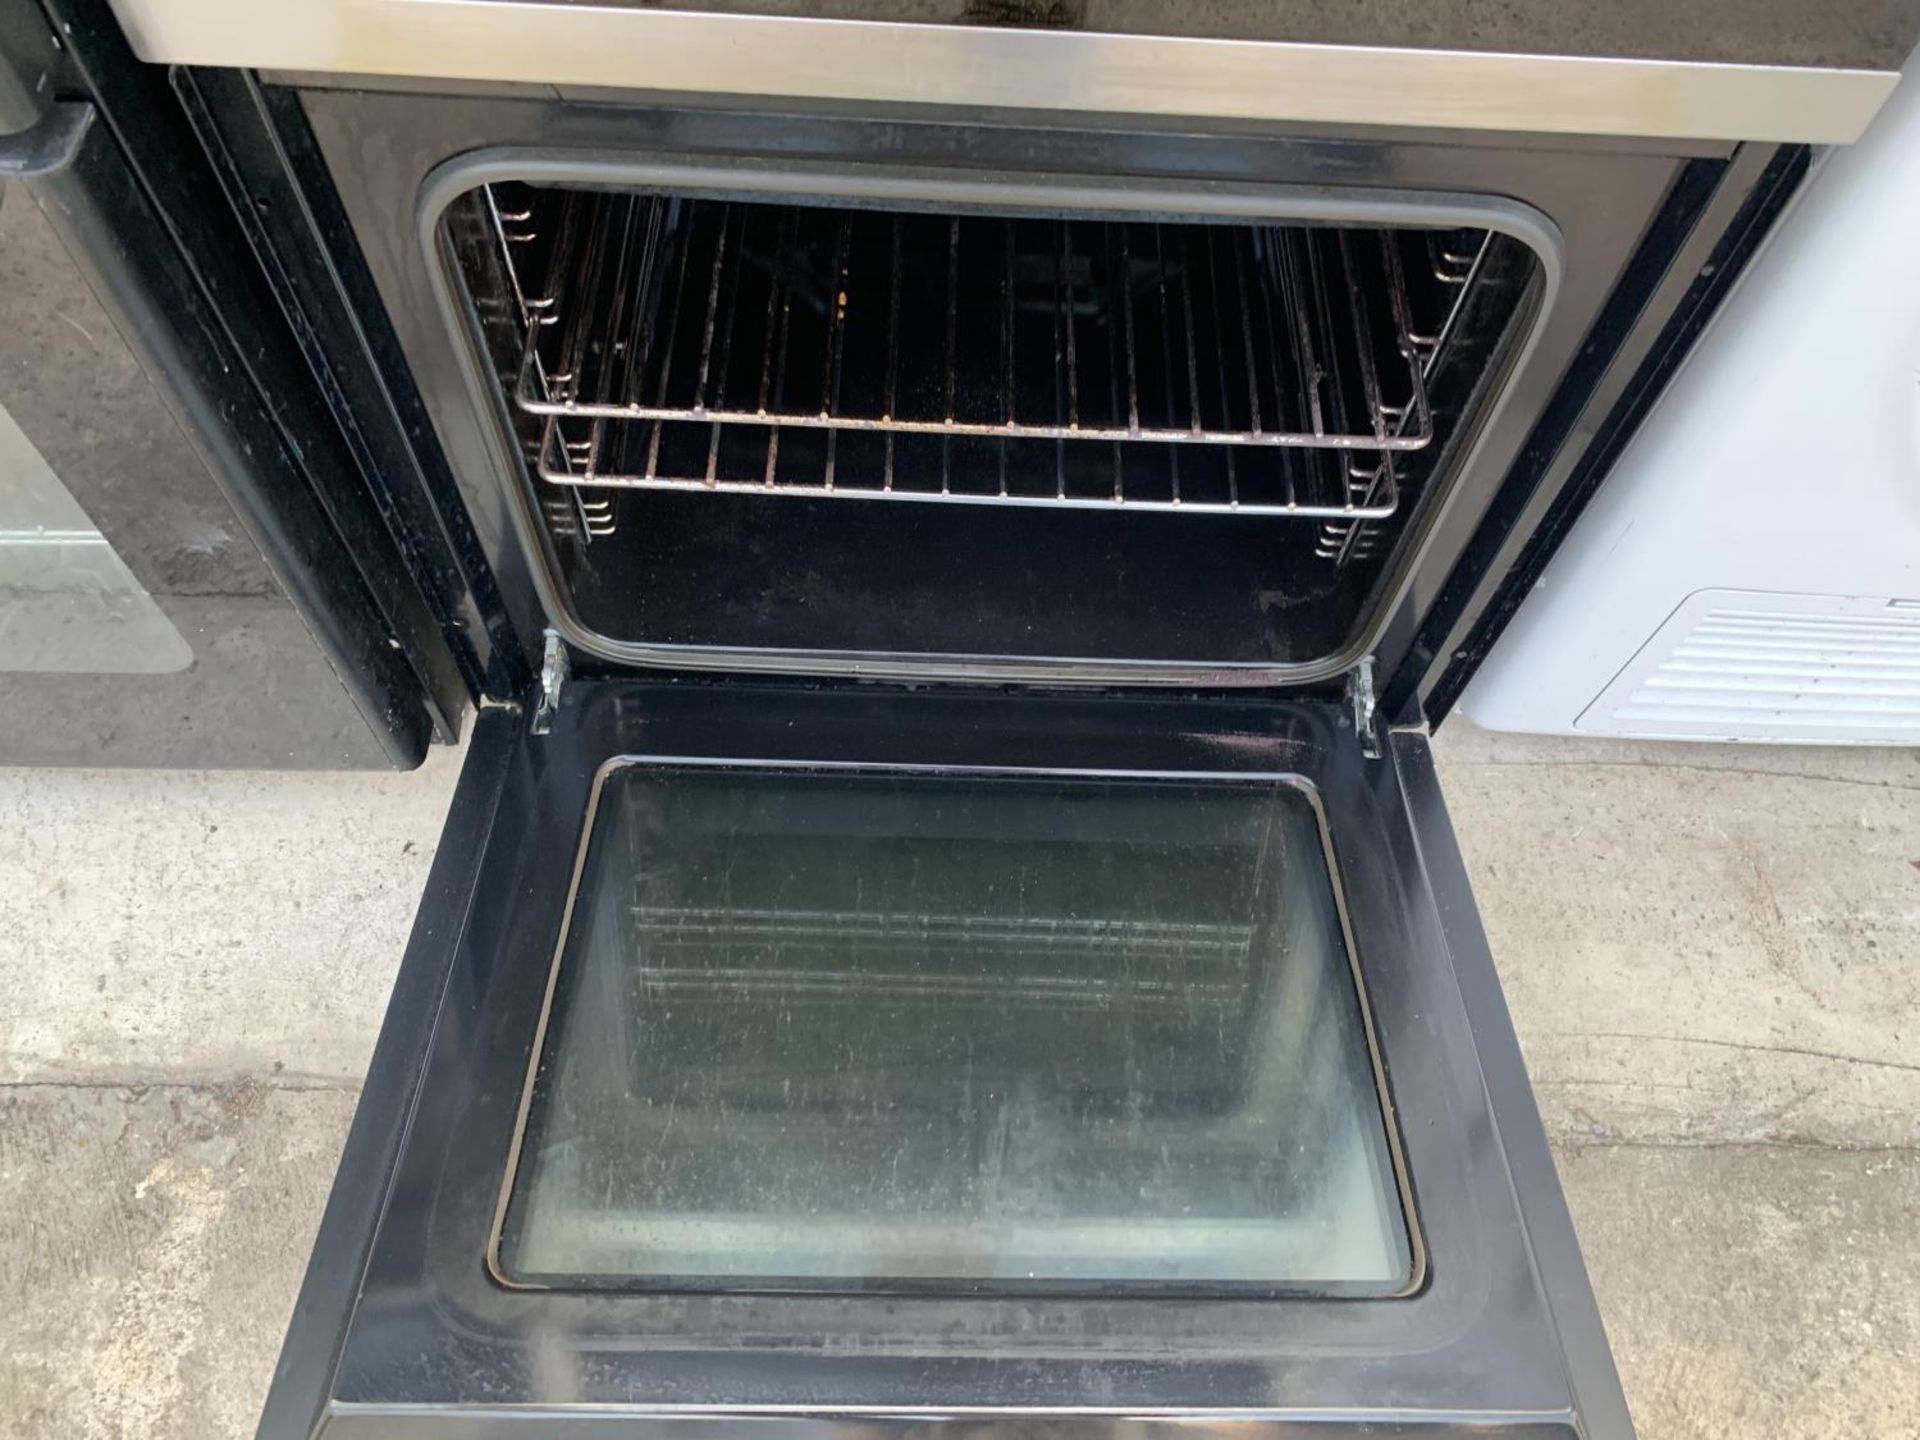 A CHROME AND BLACK BAUMATIC INTERGRATED DOUBLE OVEN - Image 3 of 3